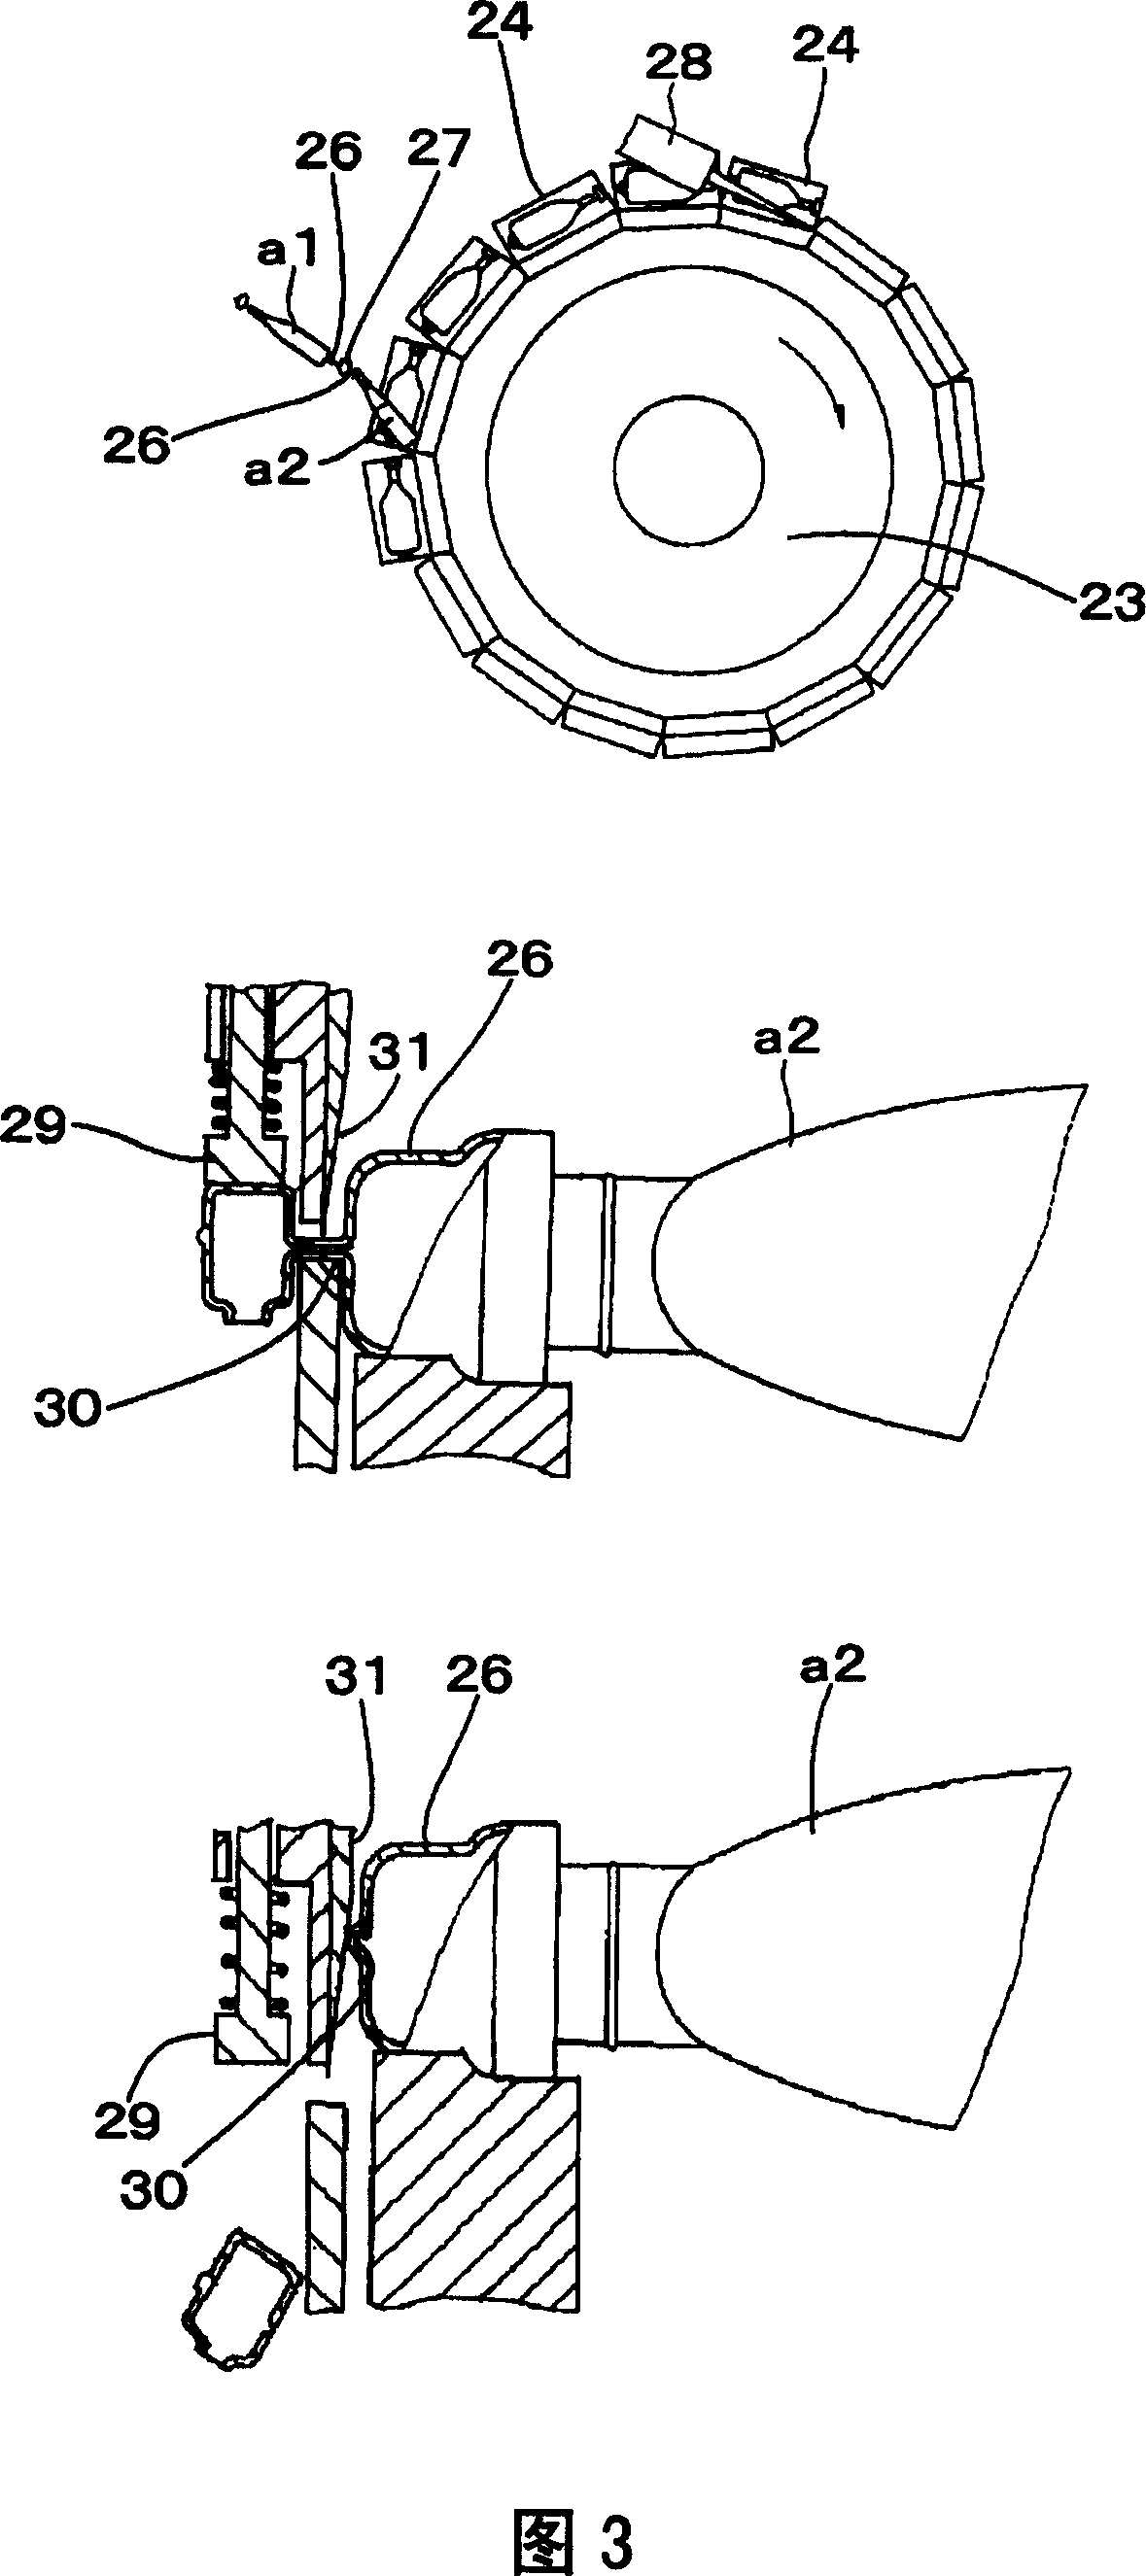 Hole checking method of blow molding article or other plastic hollow body